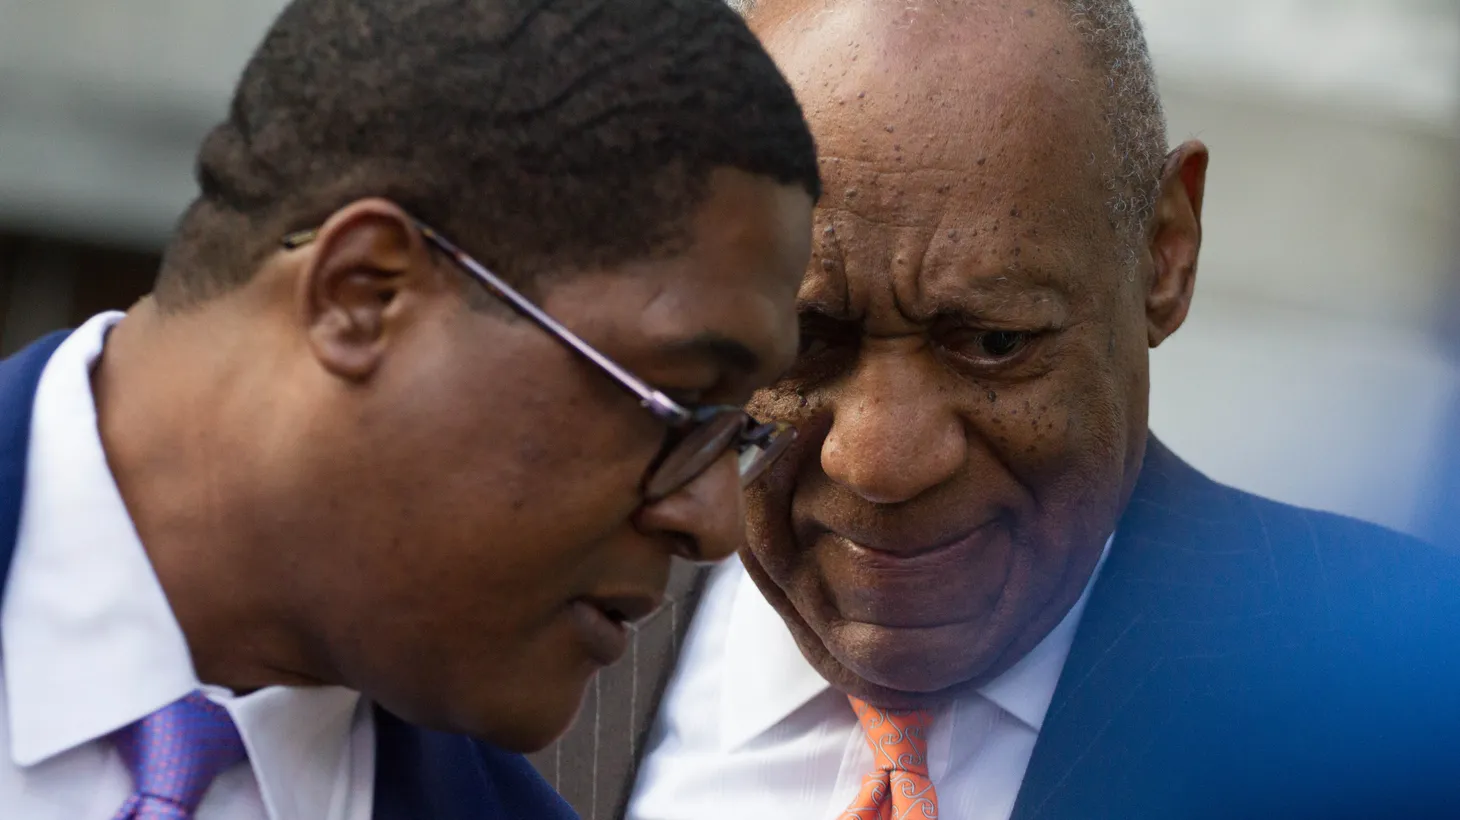 The Supreme Court declined to take a closer look at the Pennsylvania state Supreme Court’s decision to throw out Bill Cosby’s sexual assault conviction.